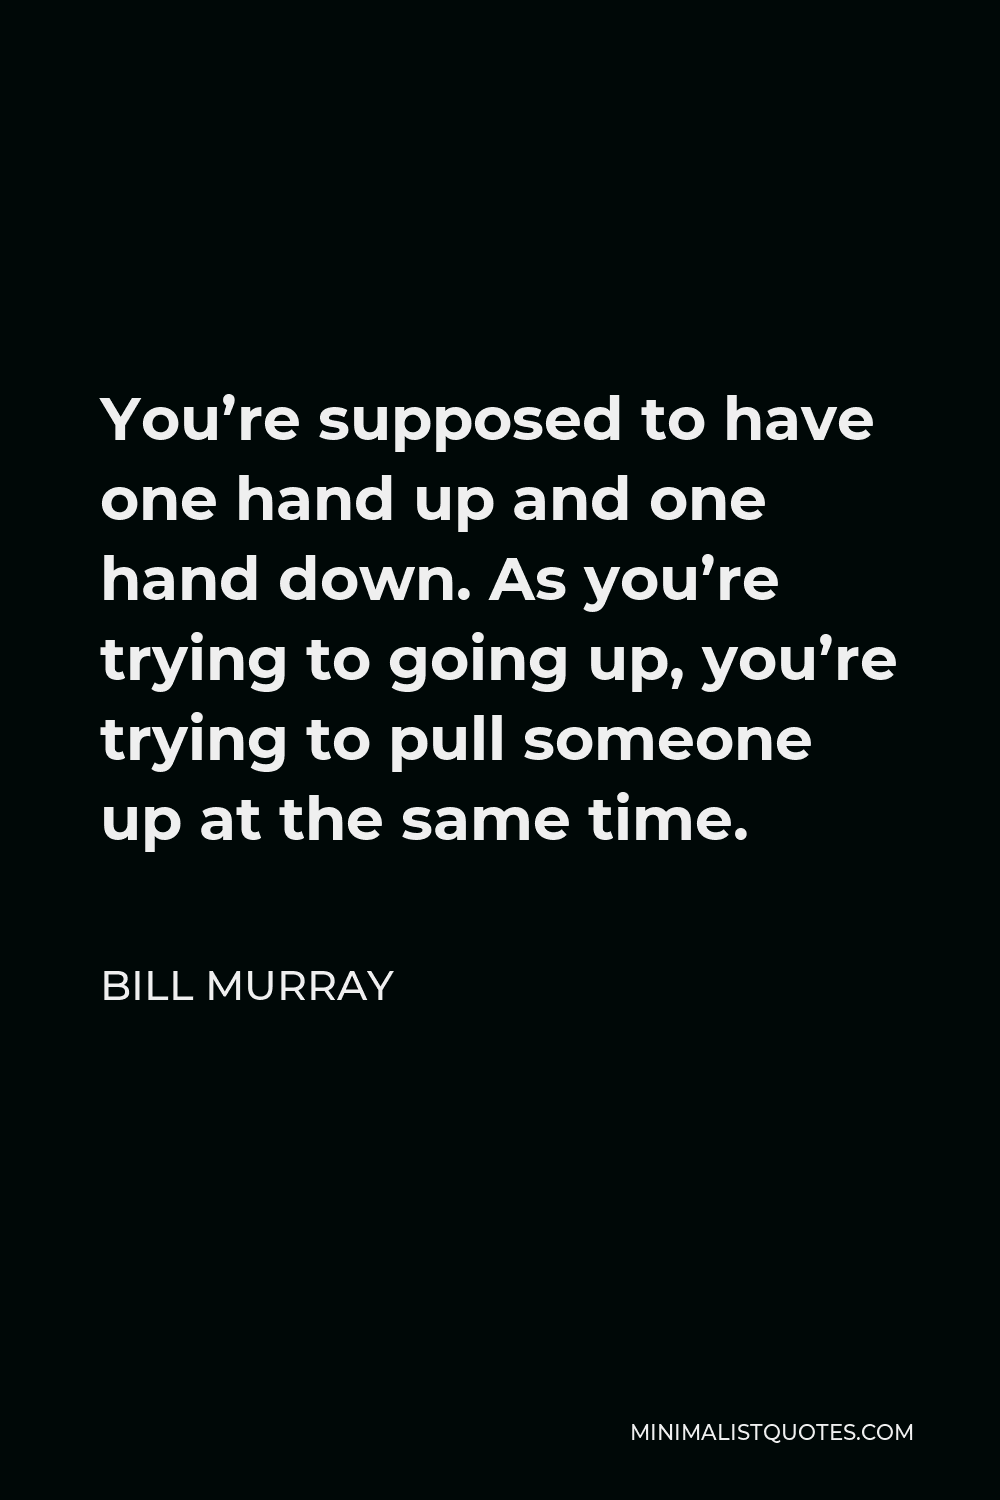 Bill Murray Quote - You’re supposed to have one hand up and one hand down. As you’re trying to going up, you’re trying to pull someone up at the same time.